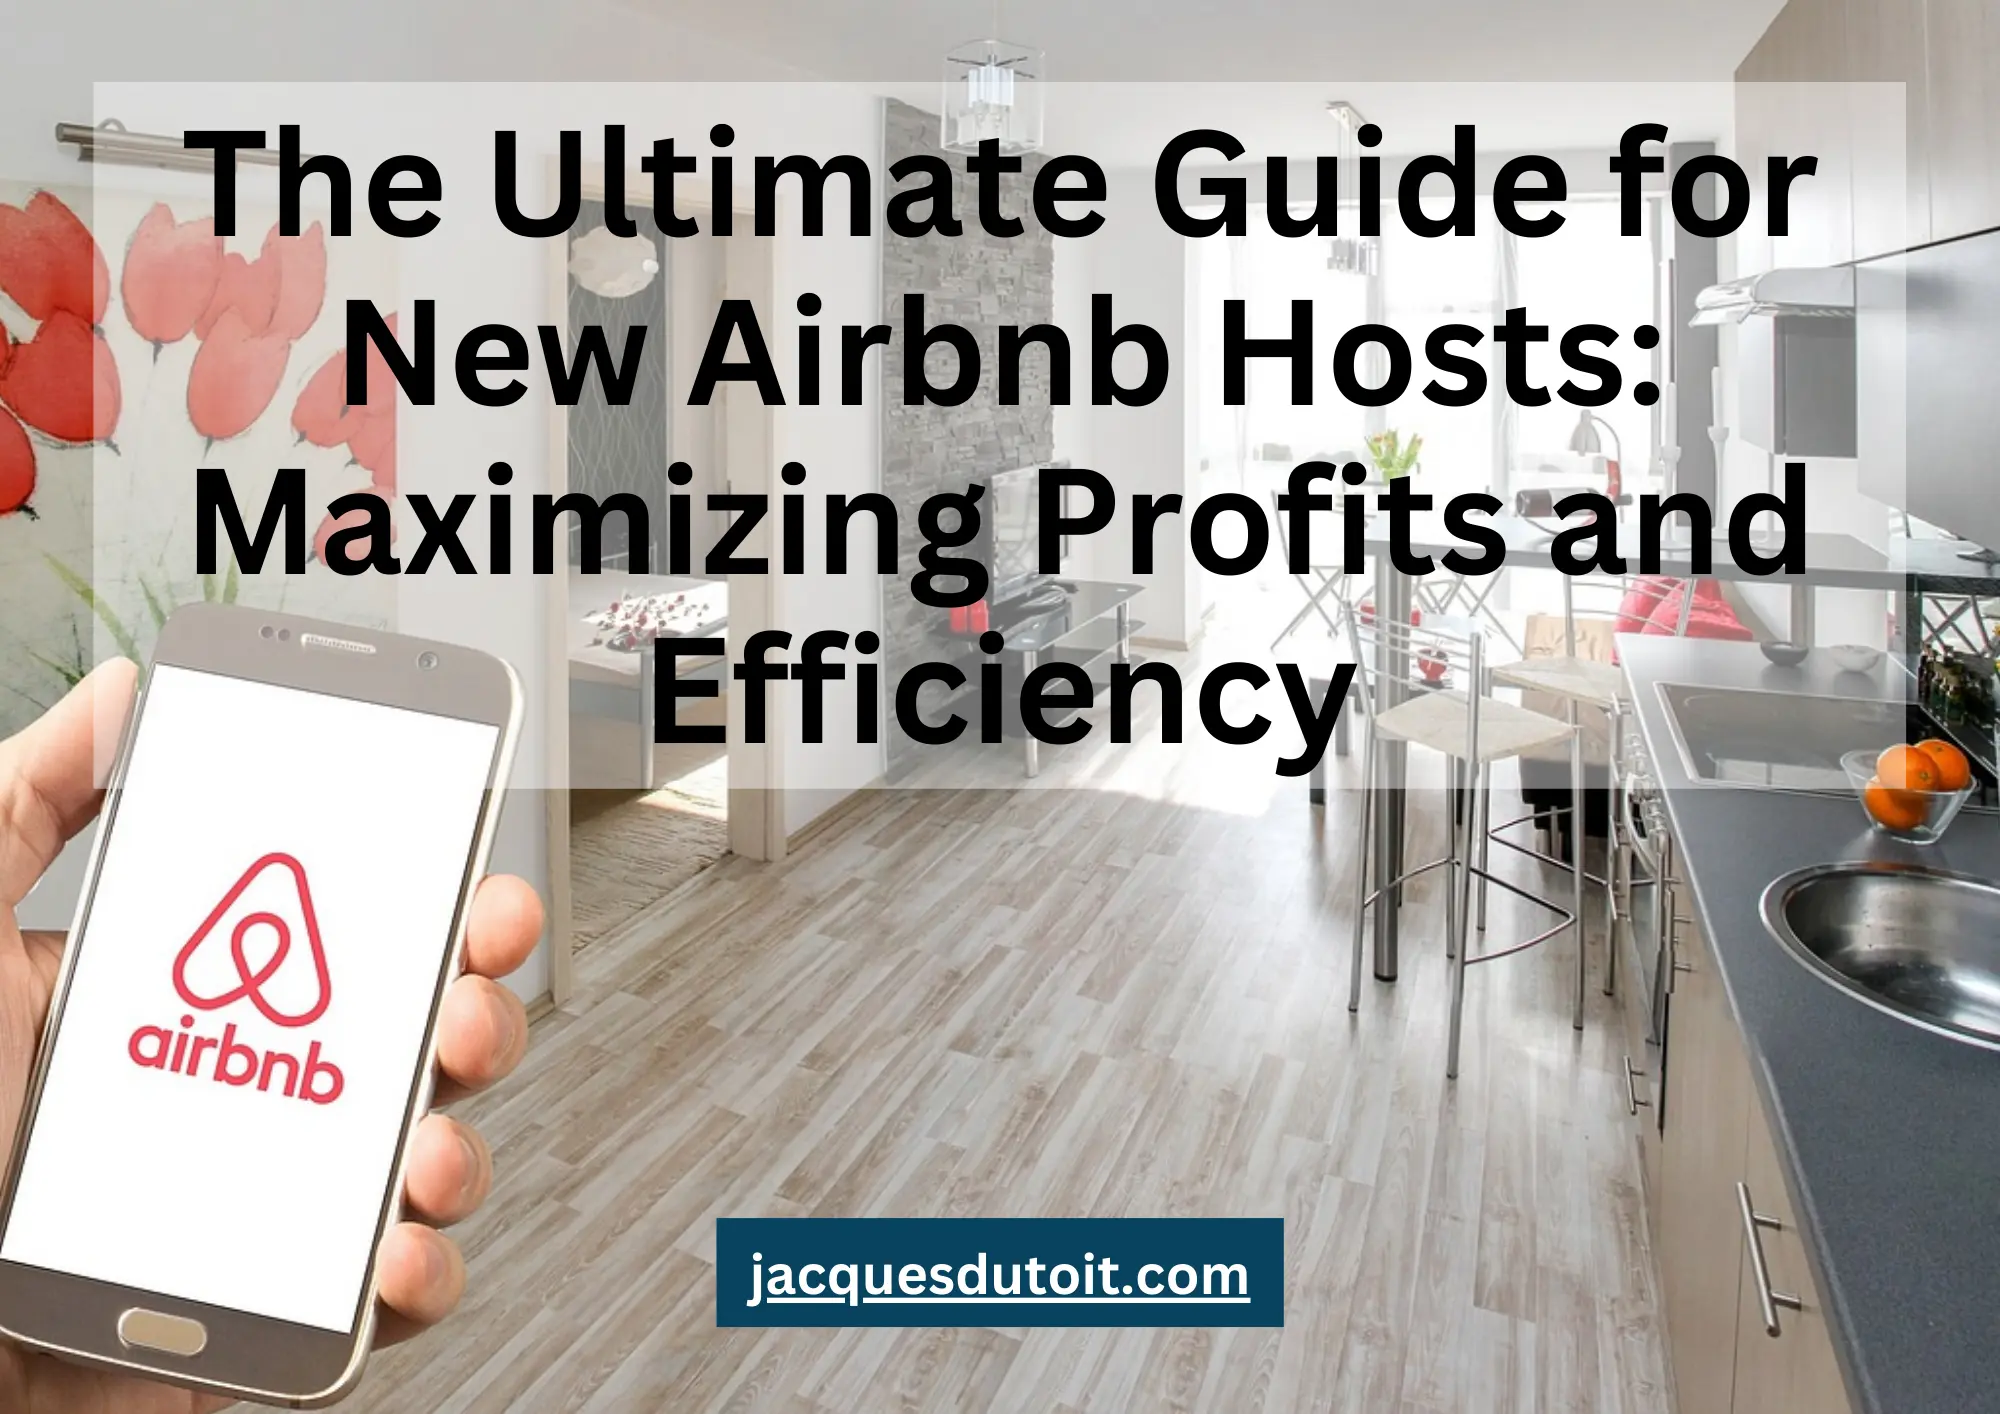 The Ultimate Guide for New Airbnb Hosts. Cover Image